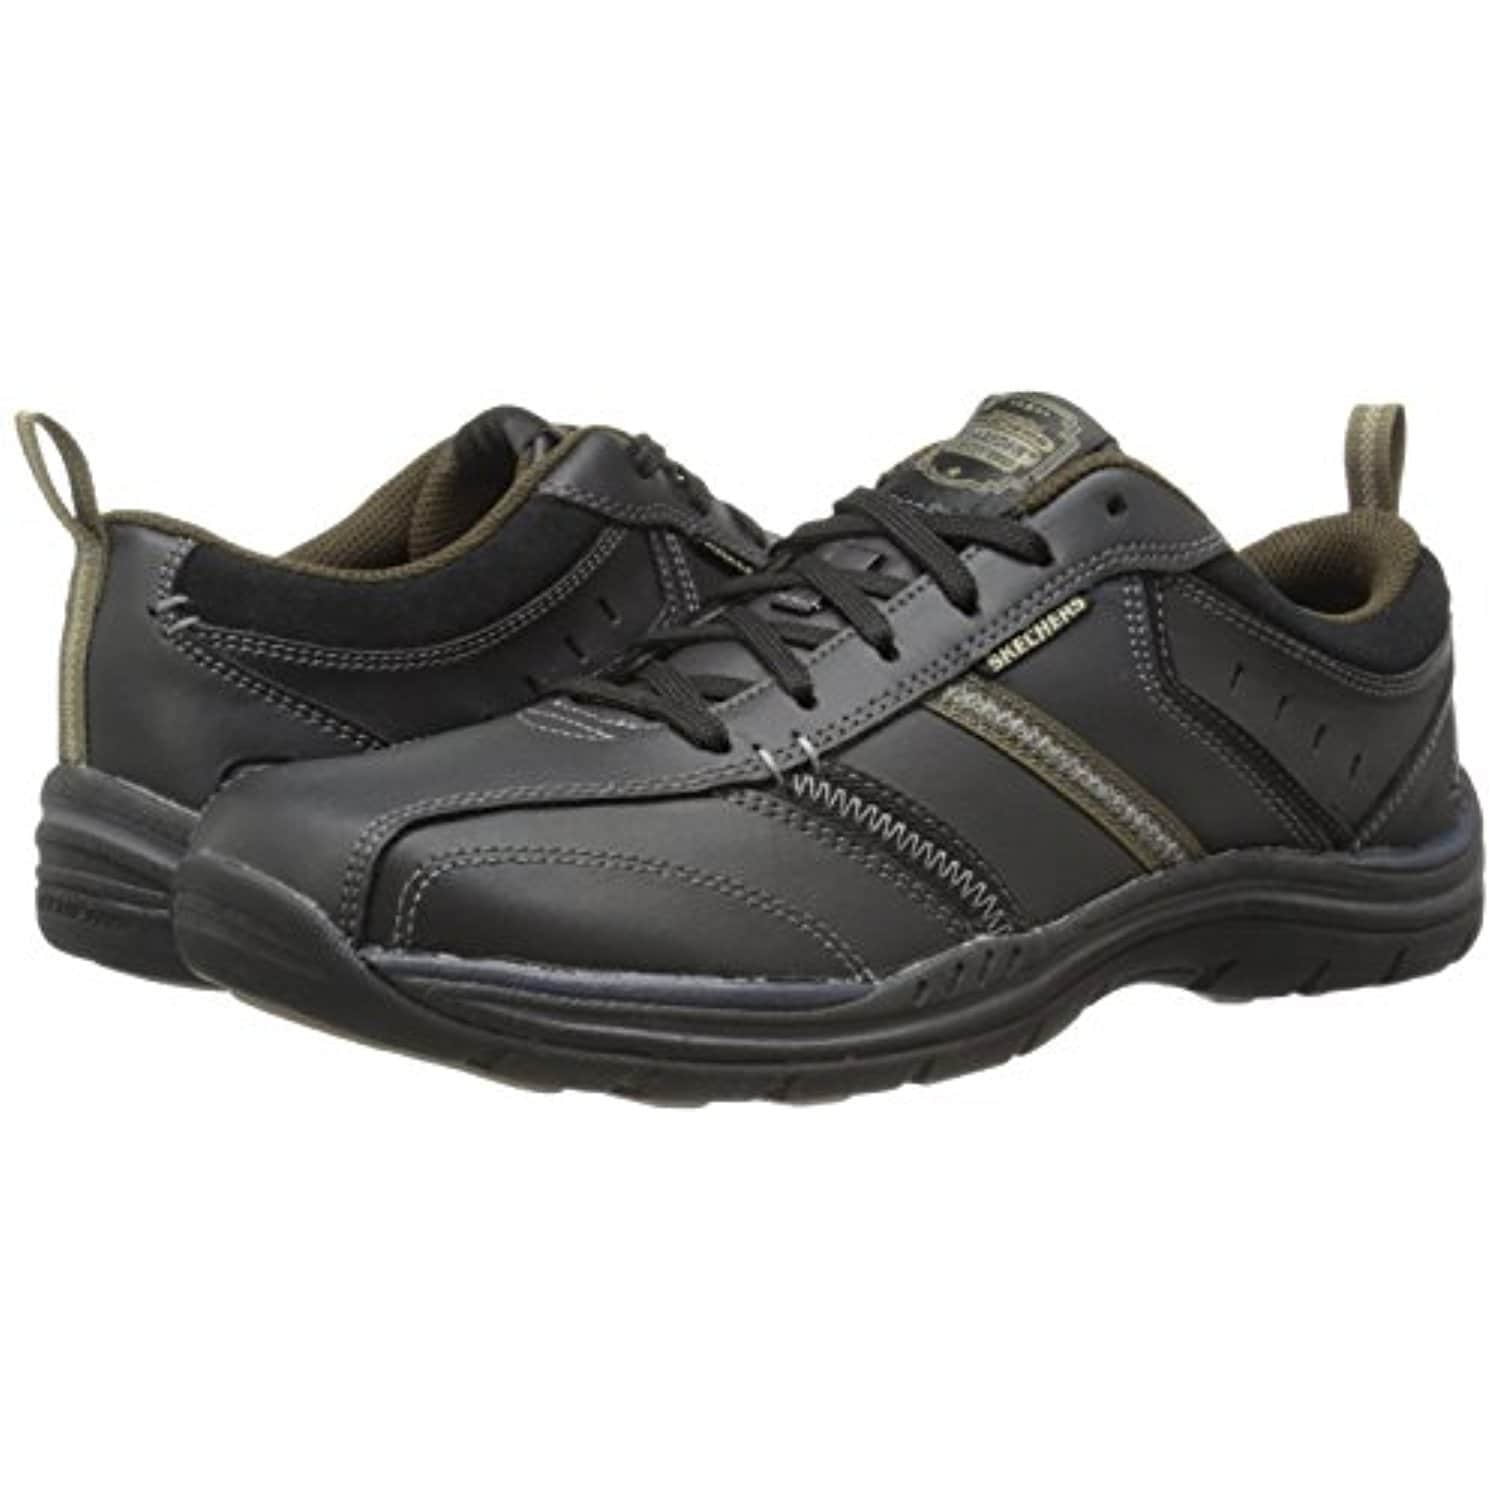 skechers usa men's expected devention oxford